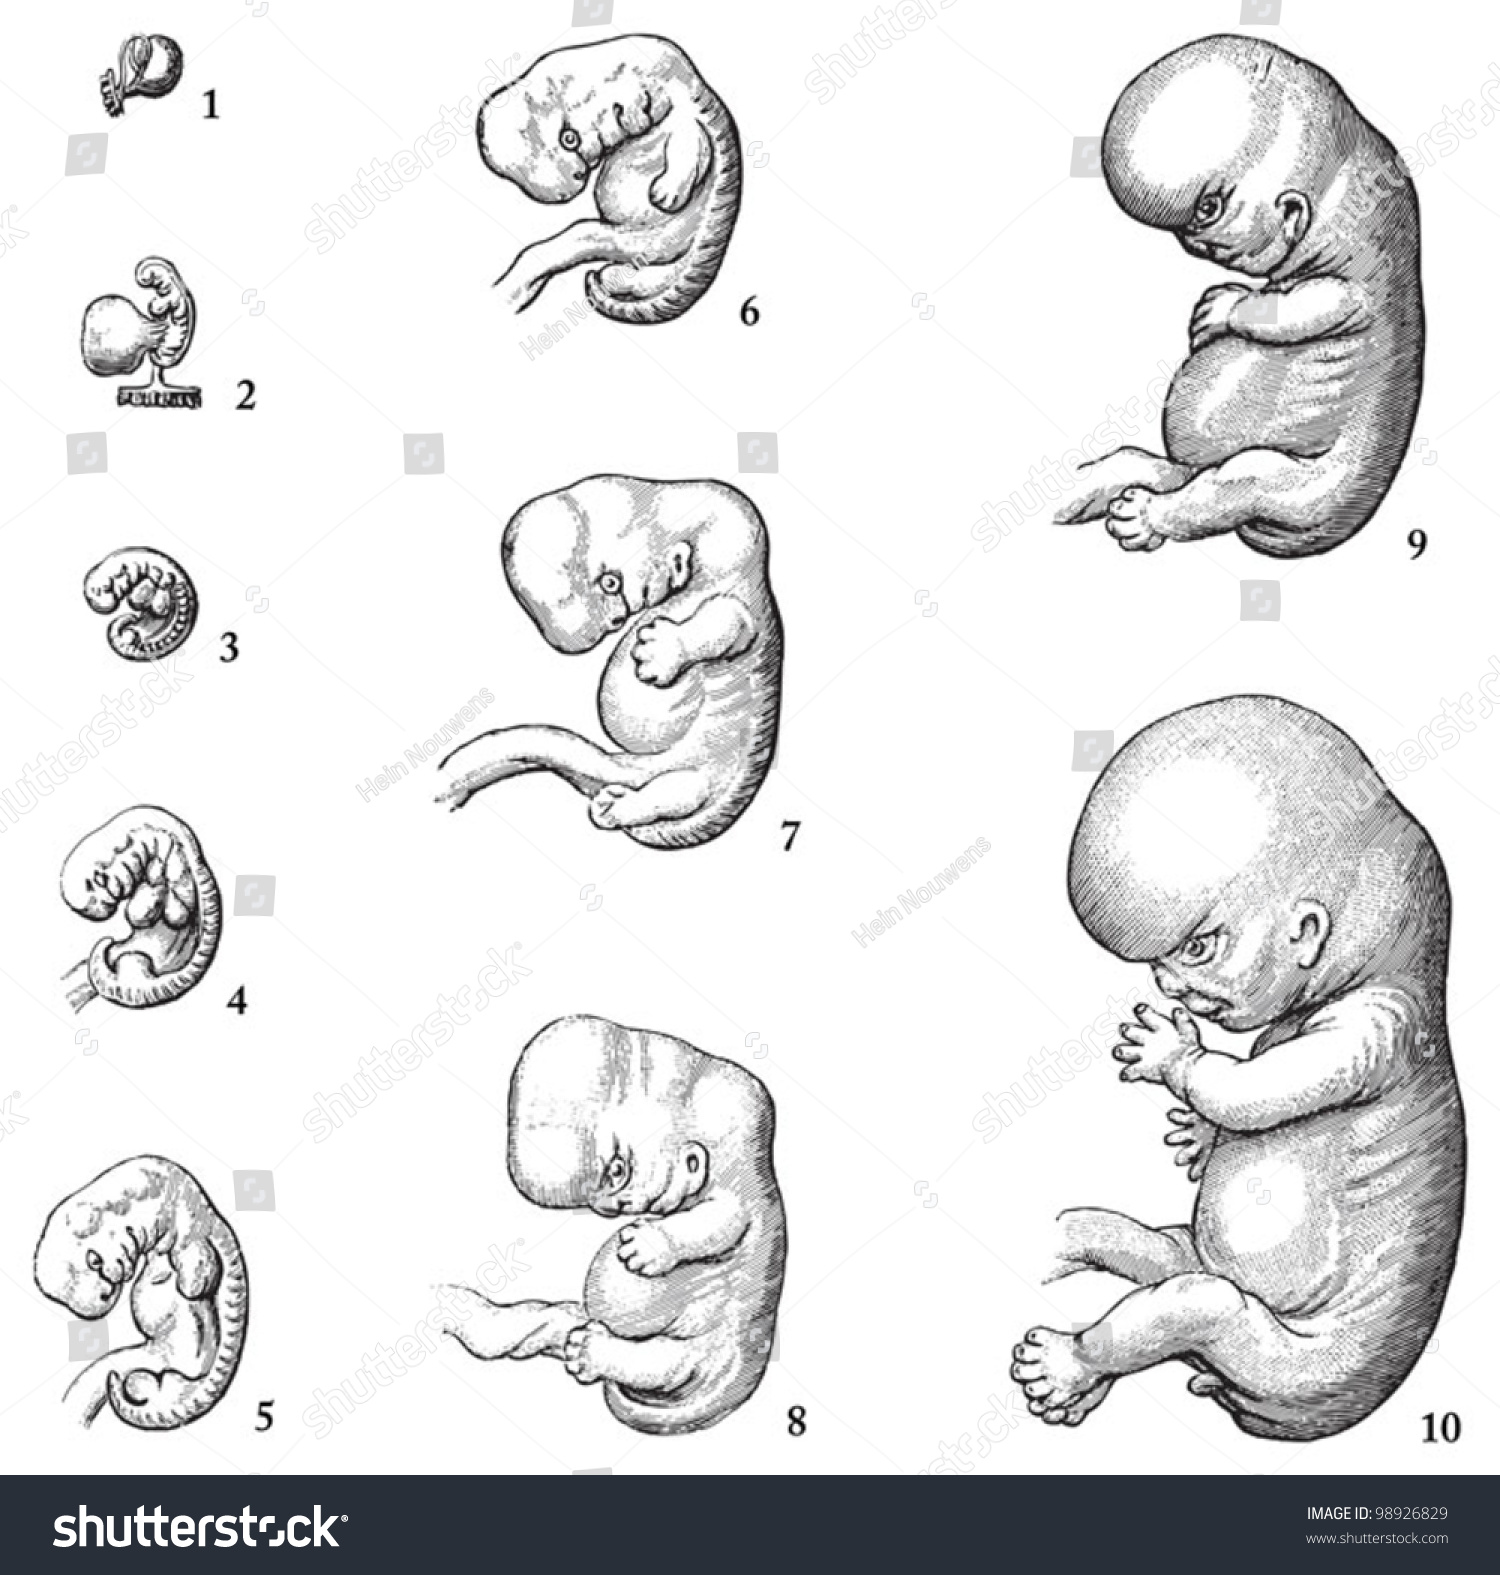 Pictures Of A Growing Human Embryo 121